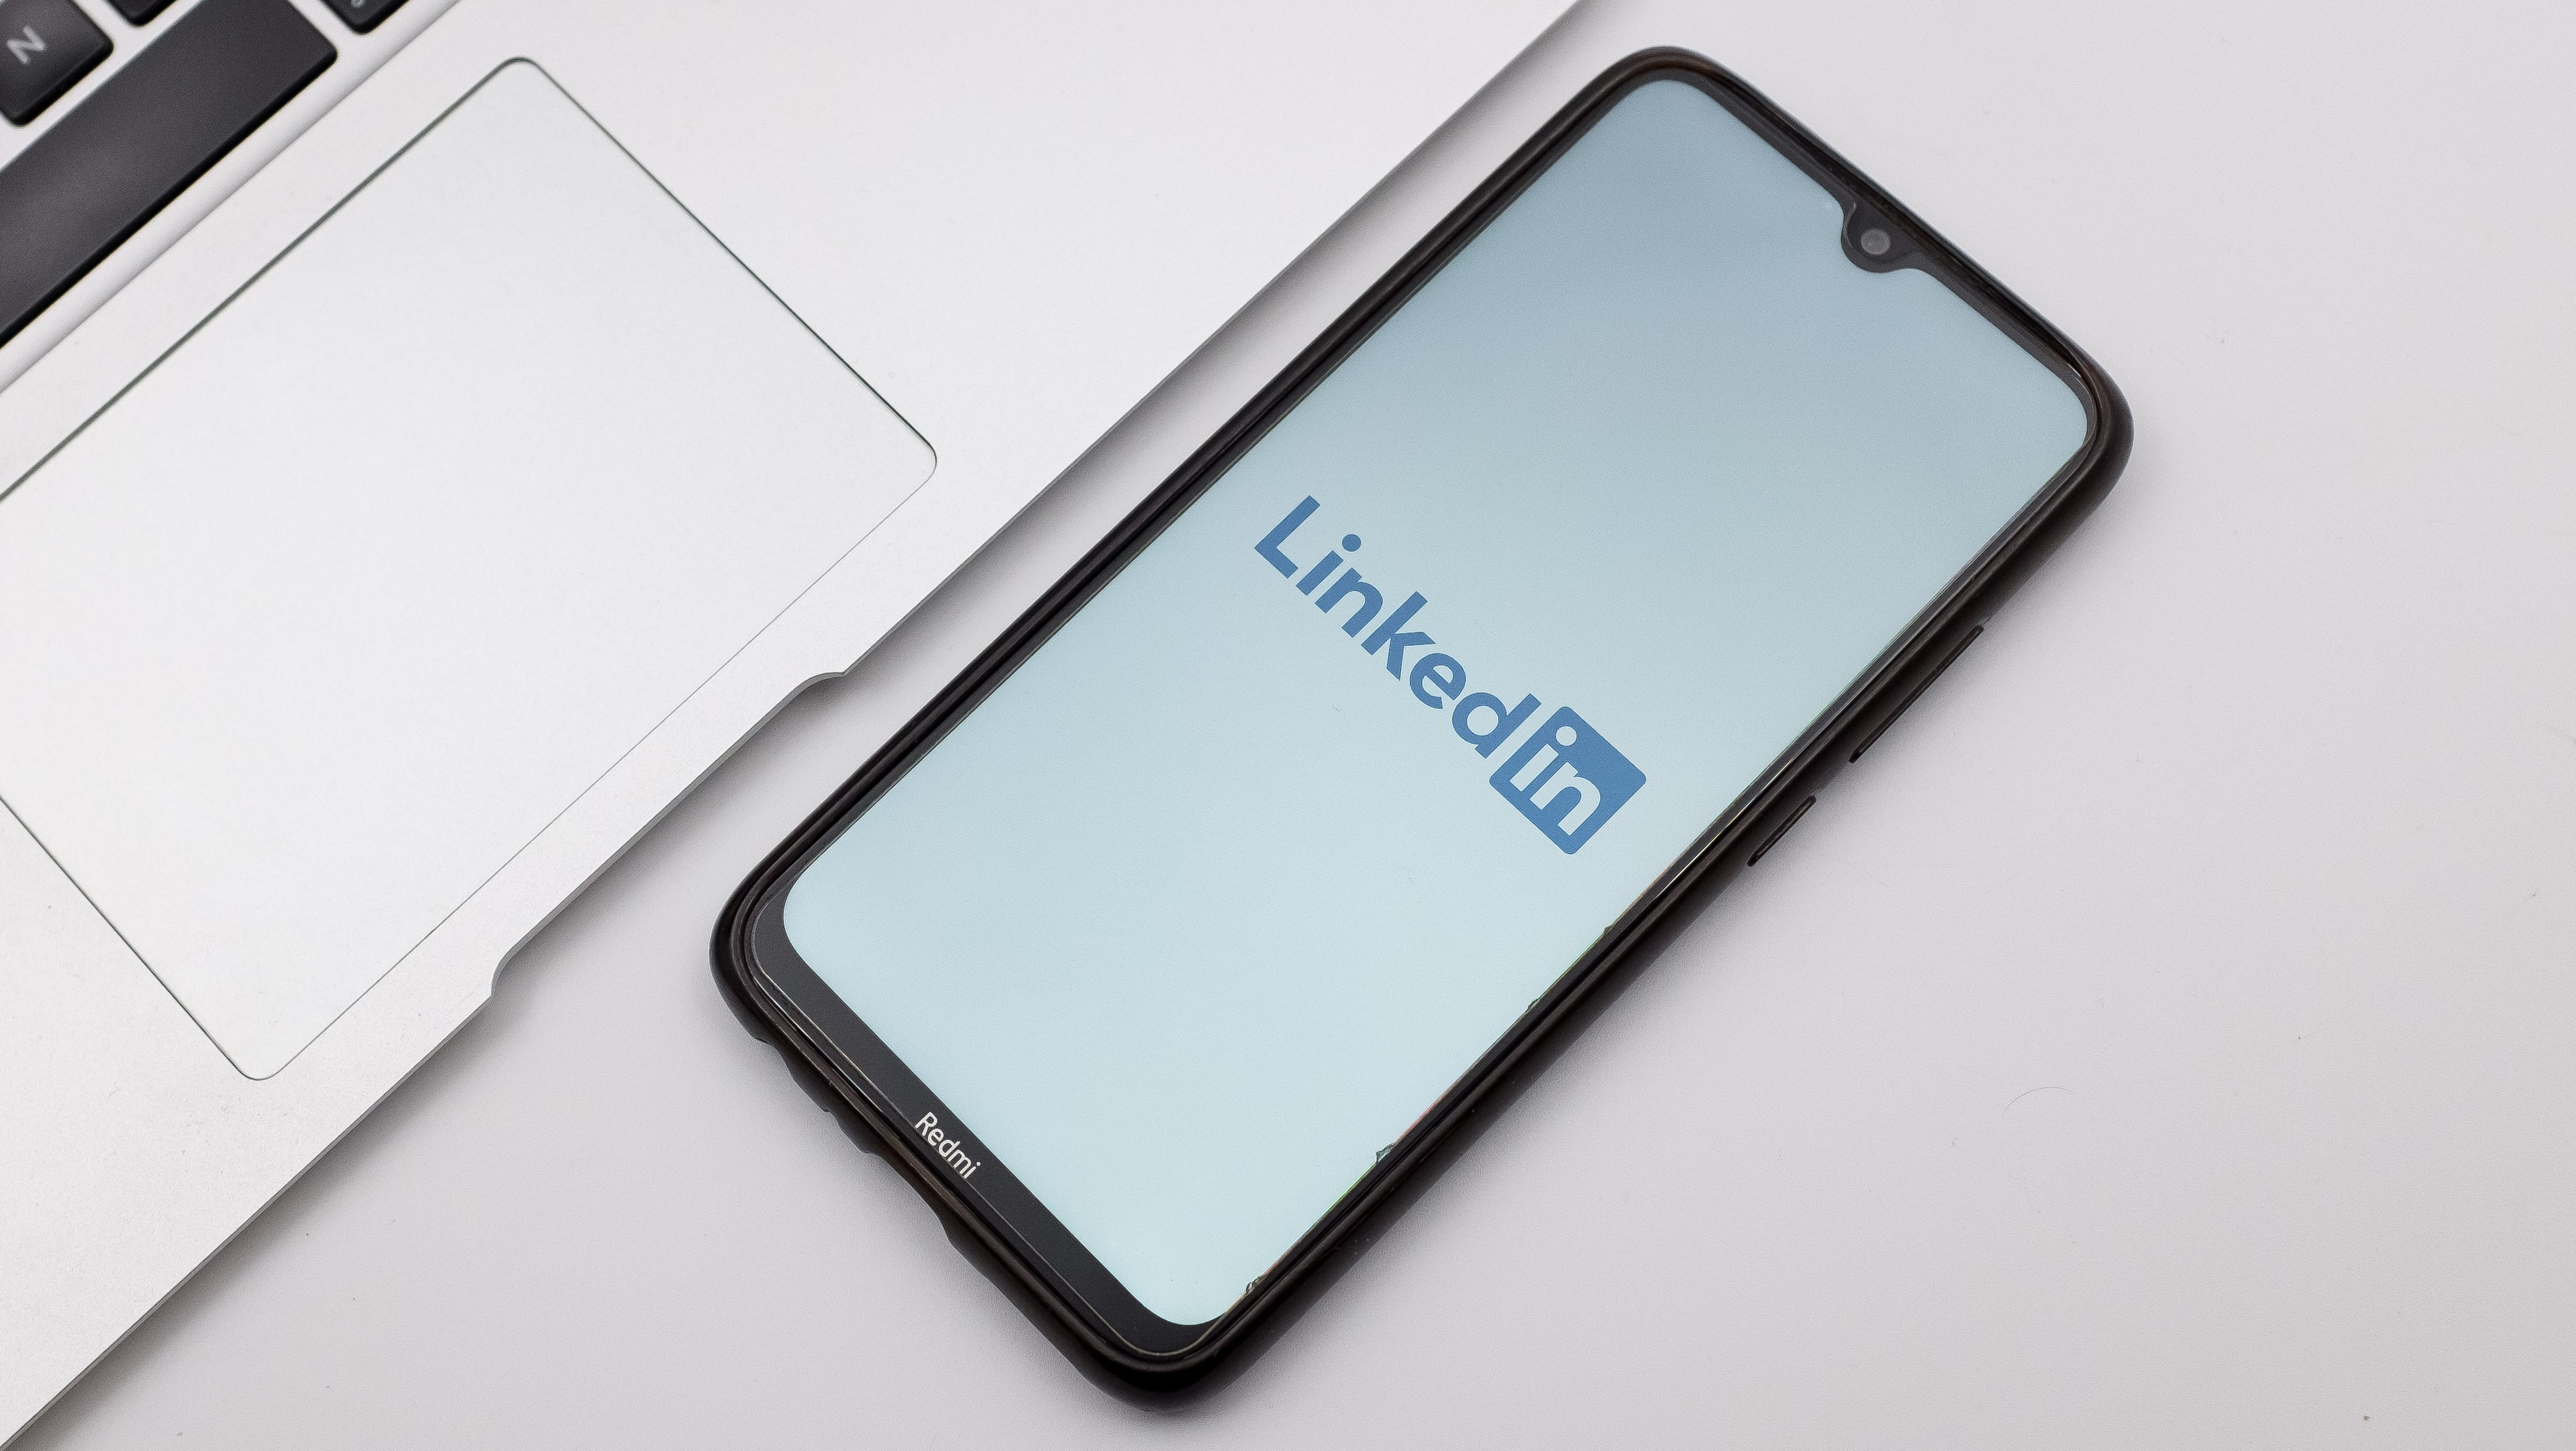 The LinkedIn mobile app is displayed on a smartphone on the desk